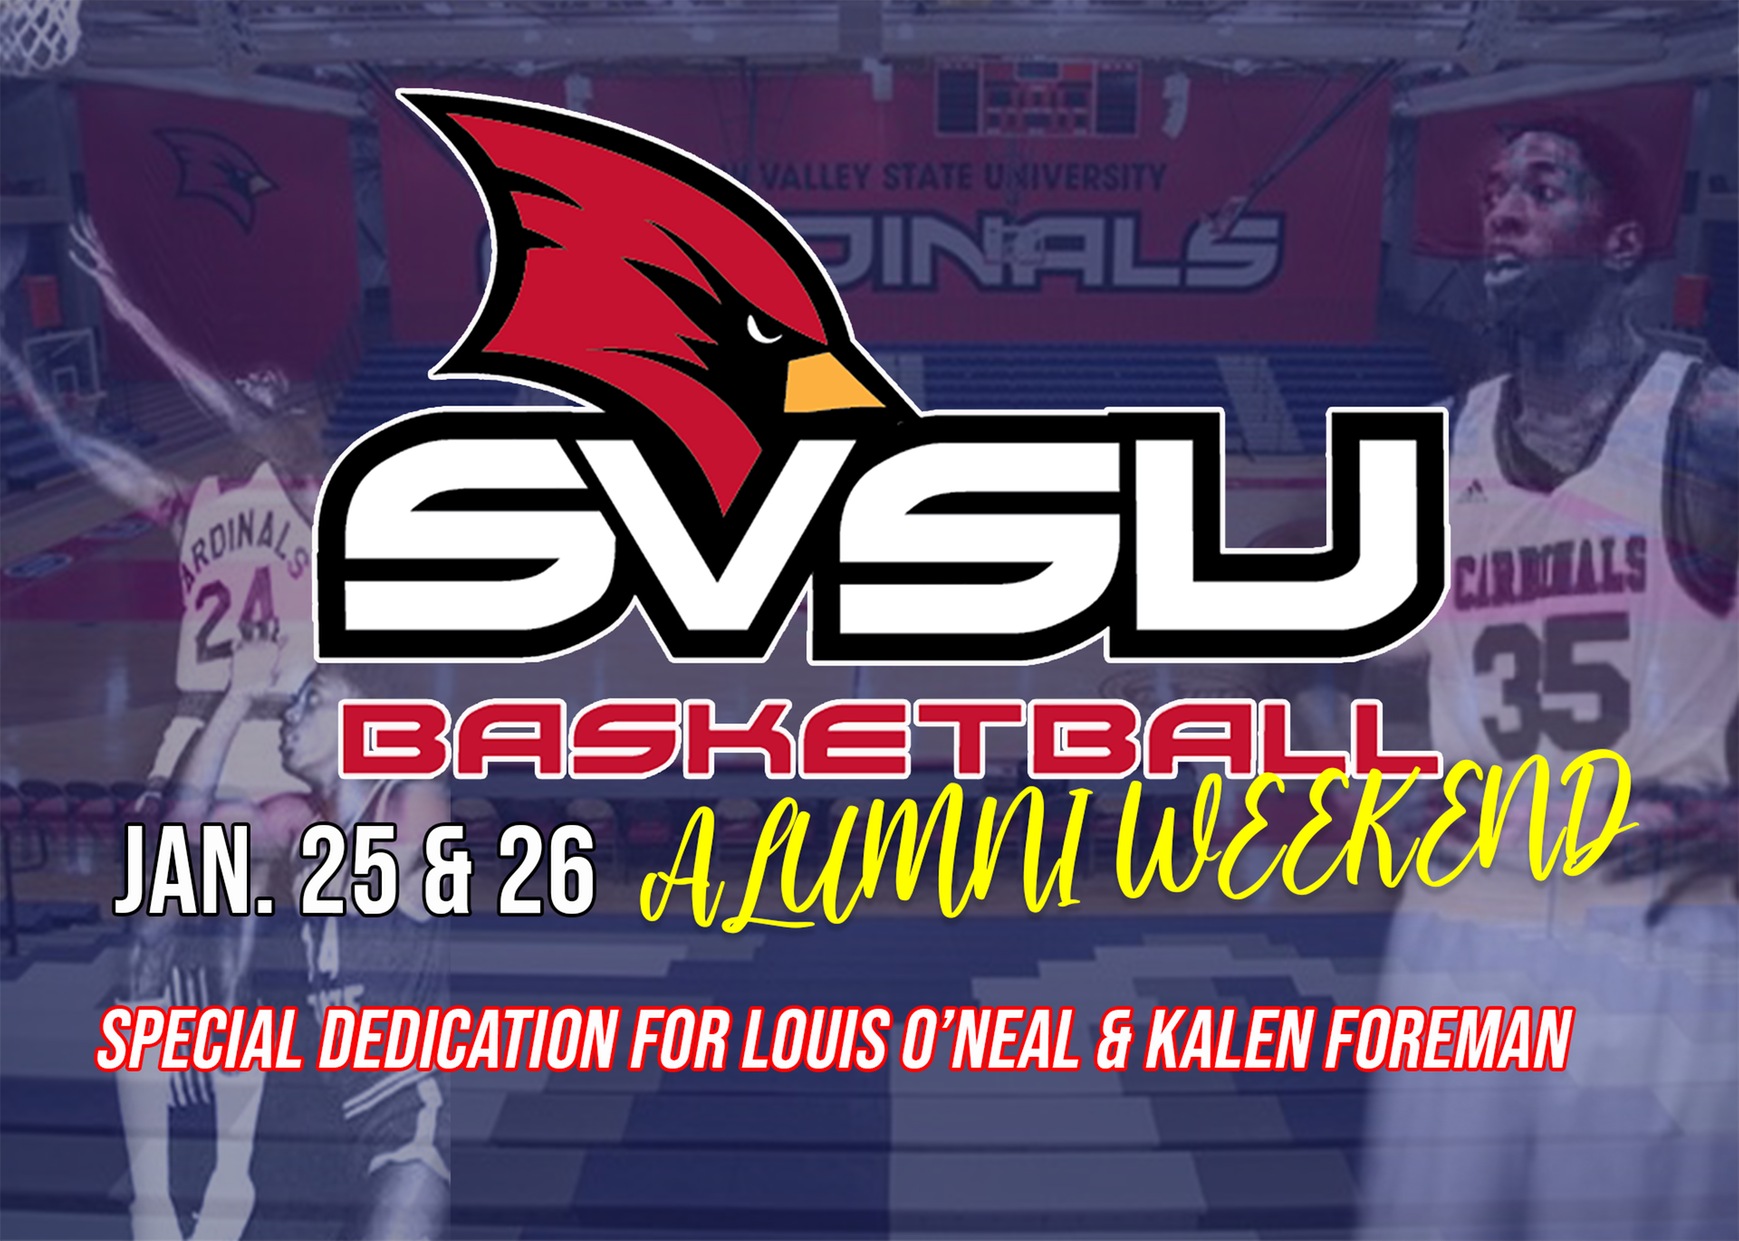 SVSU Basketball teams set for Alumni Weekend and The Hill, The High The Valley event